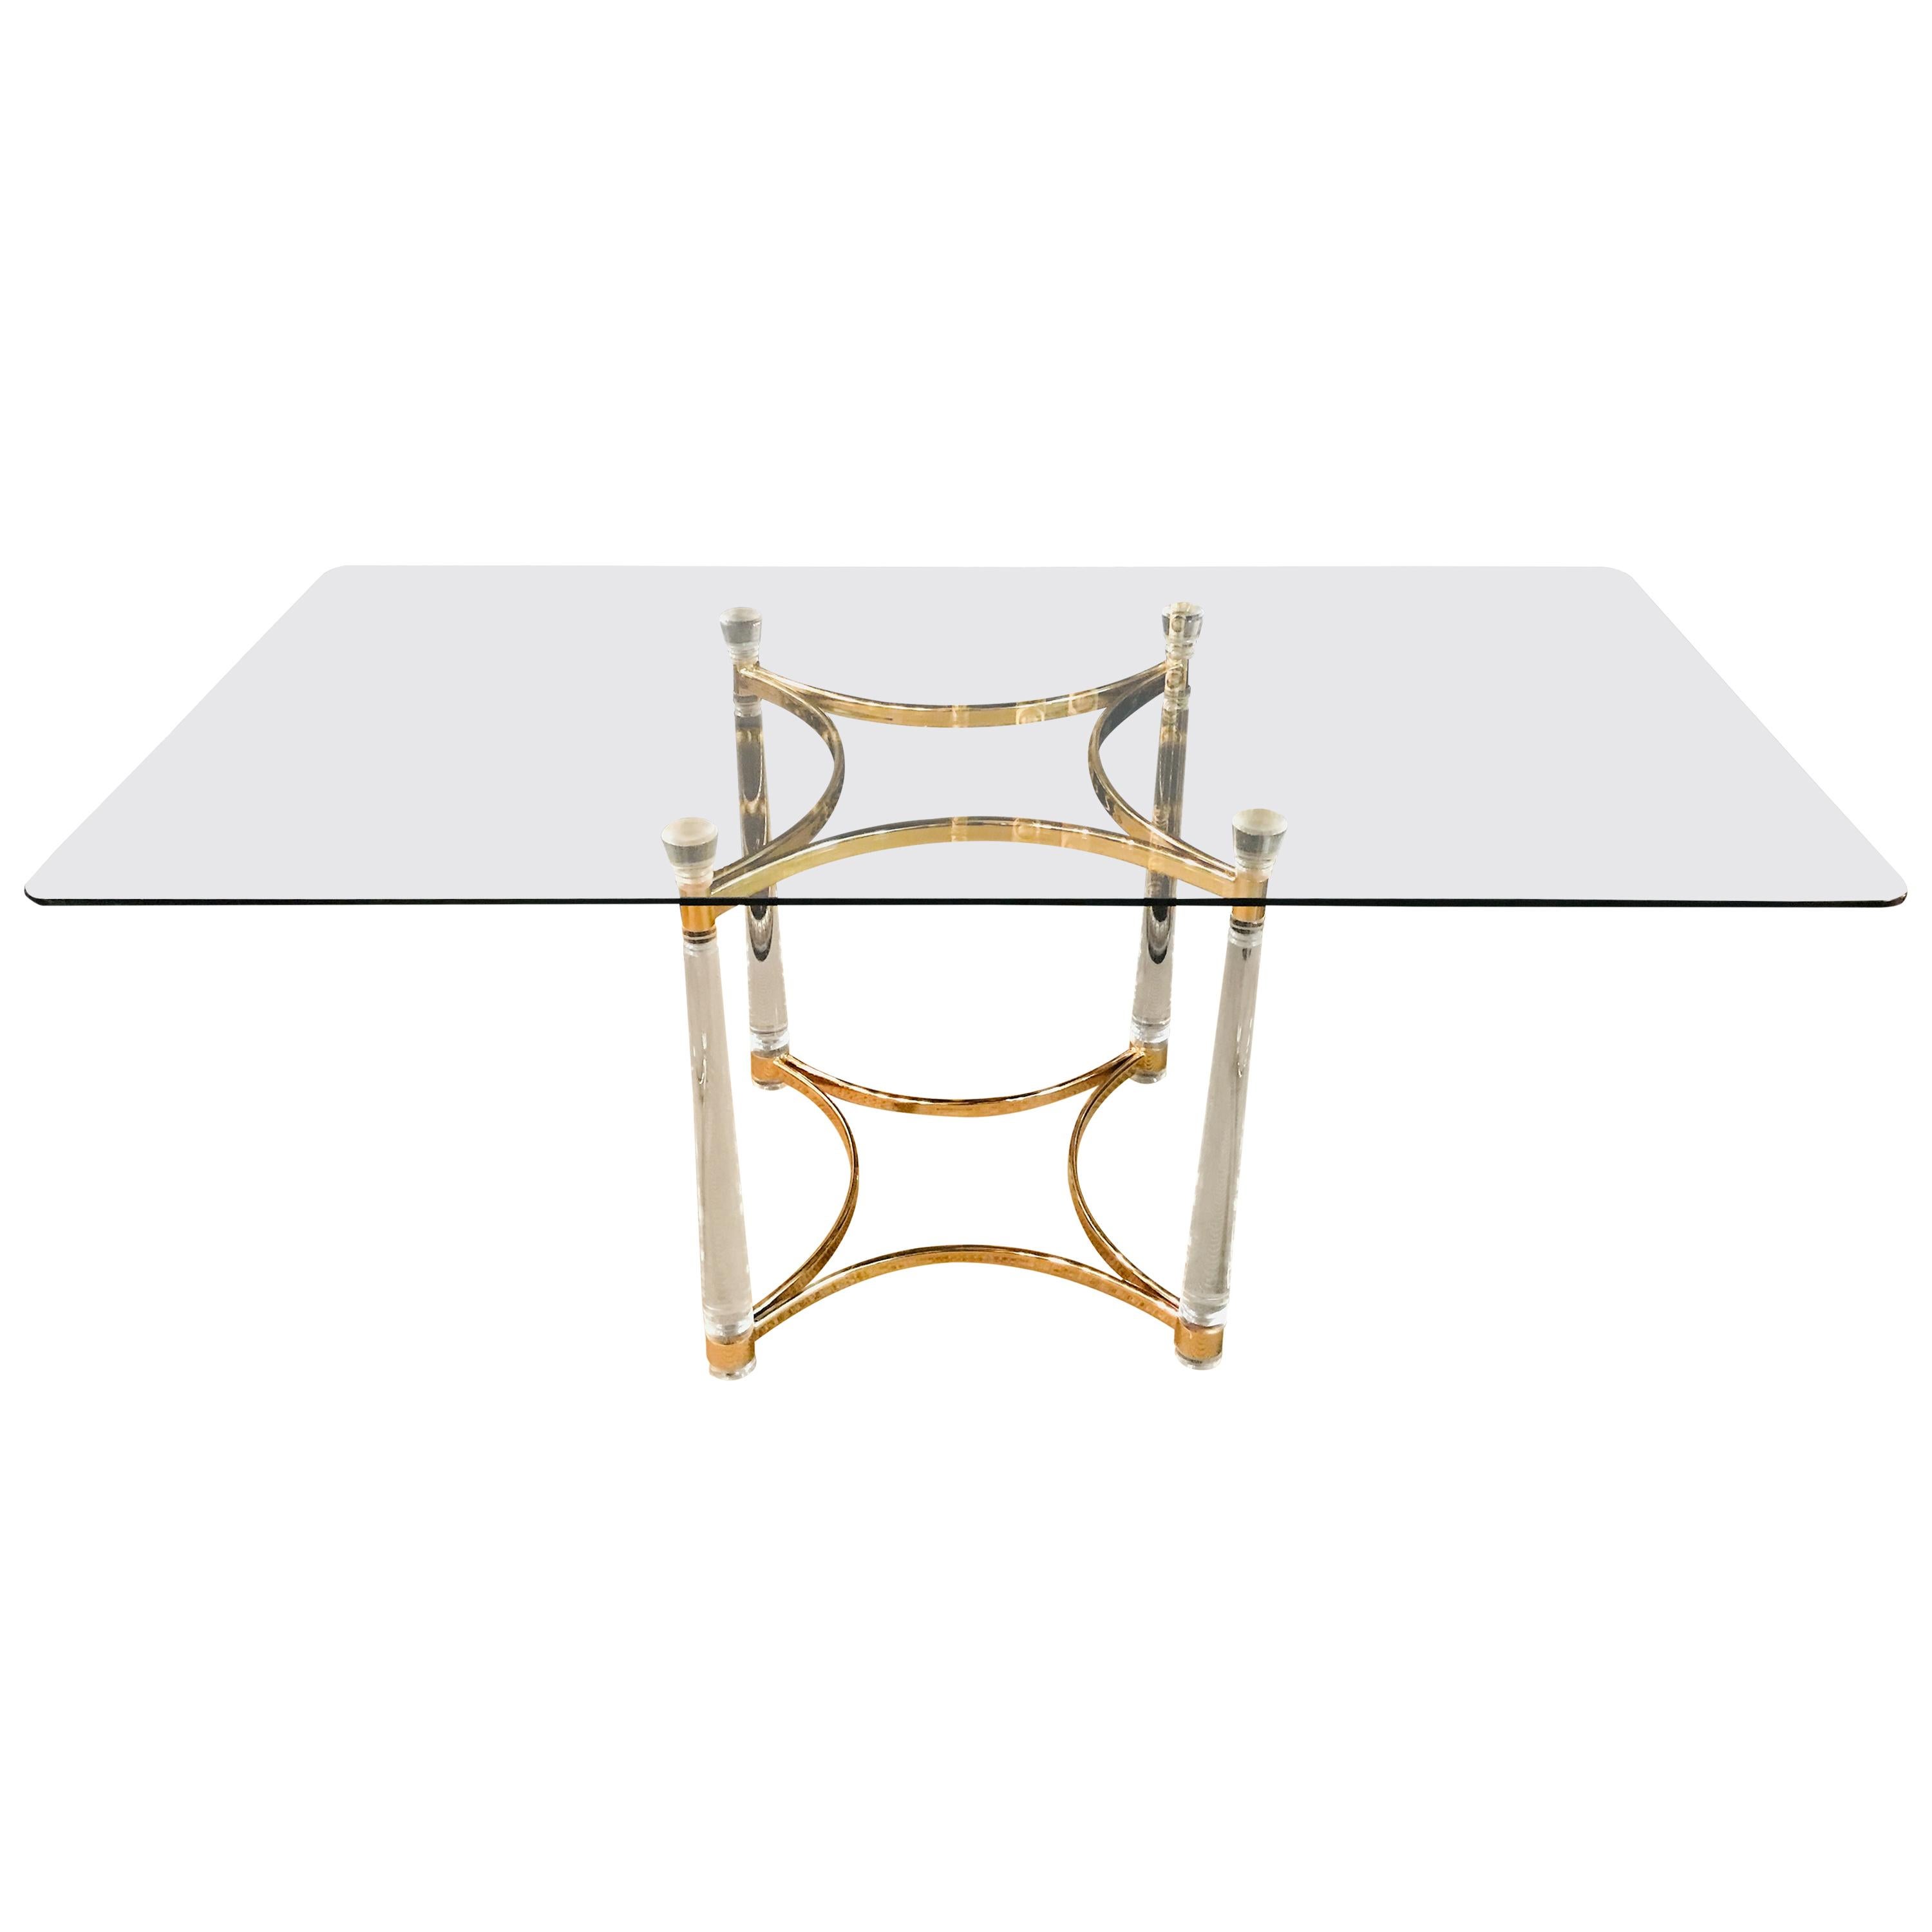 Acrylic Dining Table with Four Collumns Legs and rectangular Glass Plate